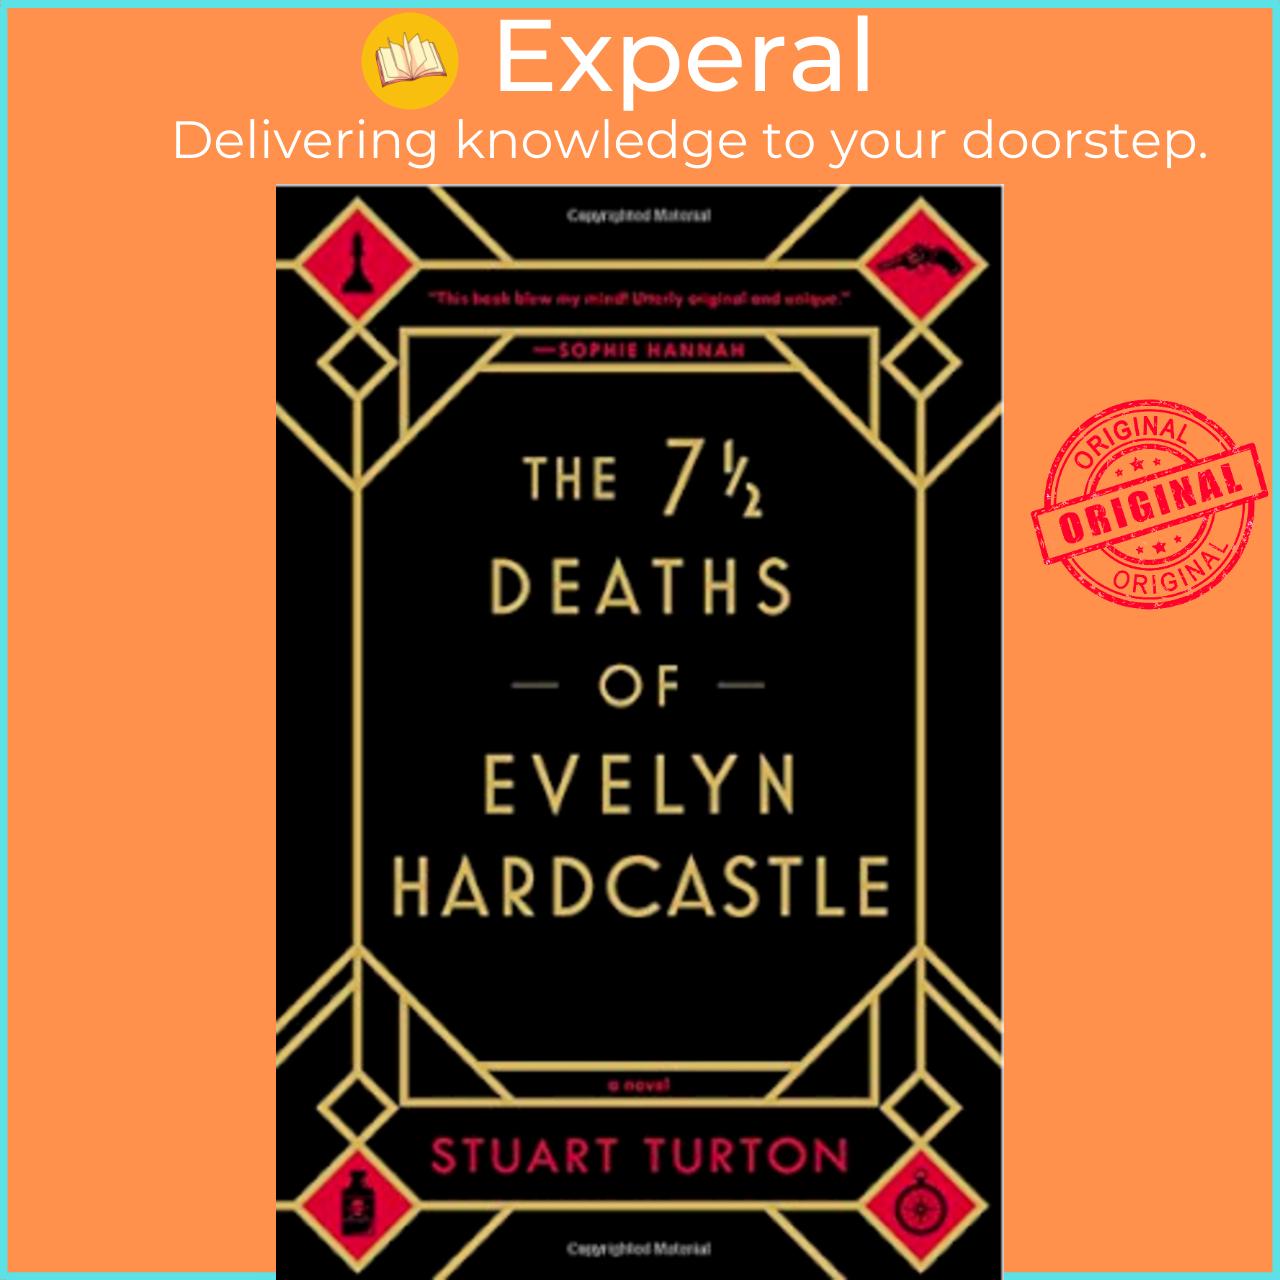 Sách - The 7 1/2 Deaths of Evelyn Hardcastle by Stuart Turton (US edition, paperback)